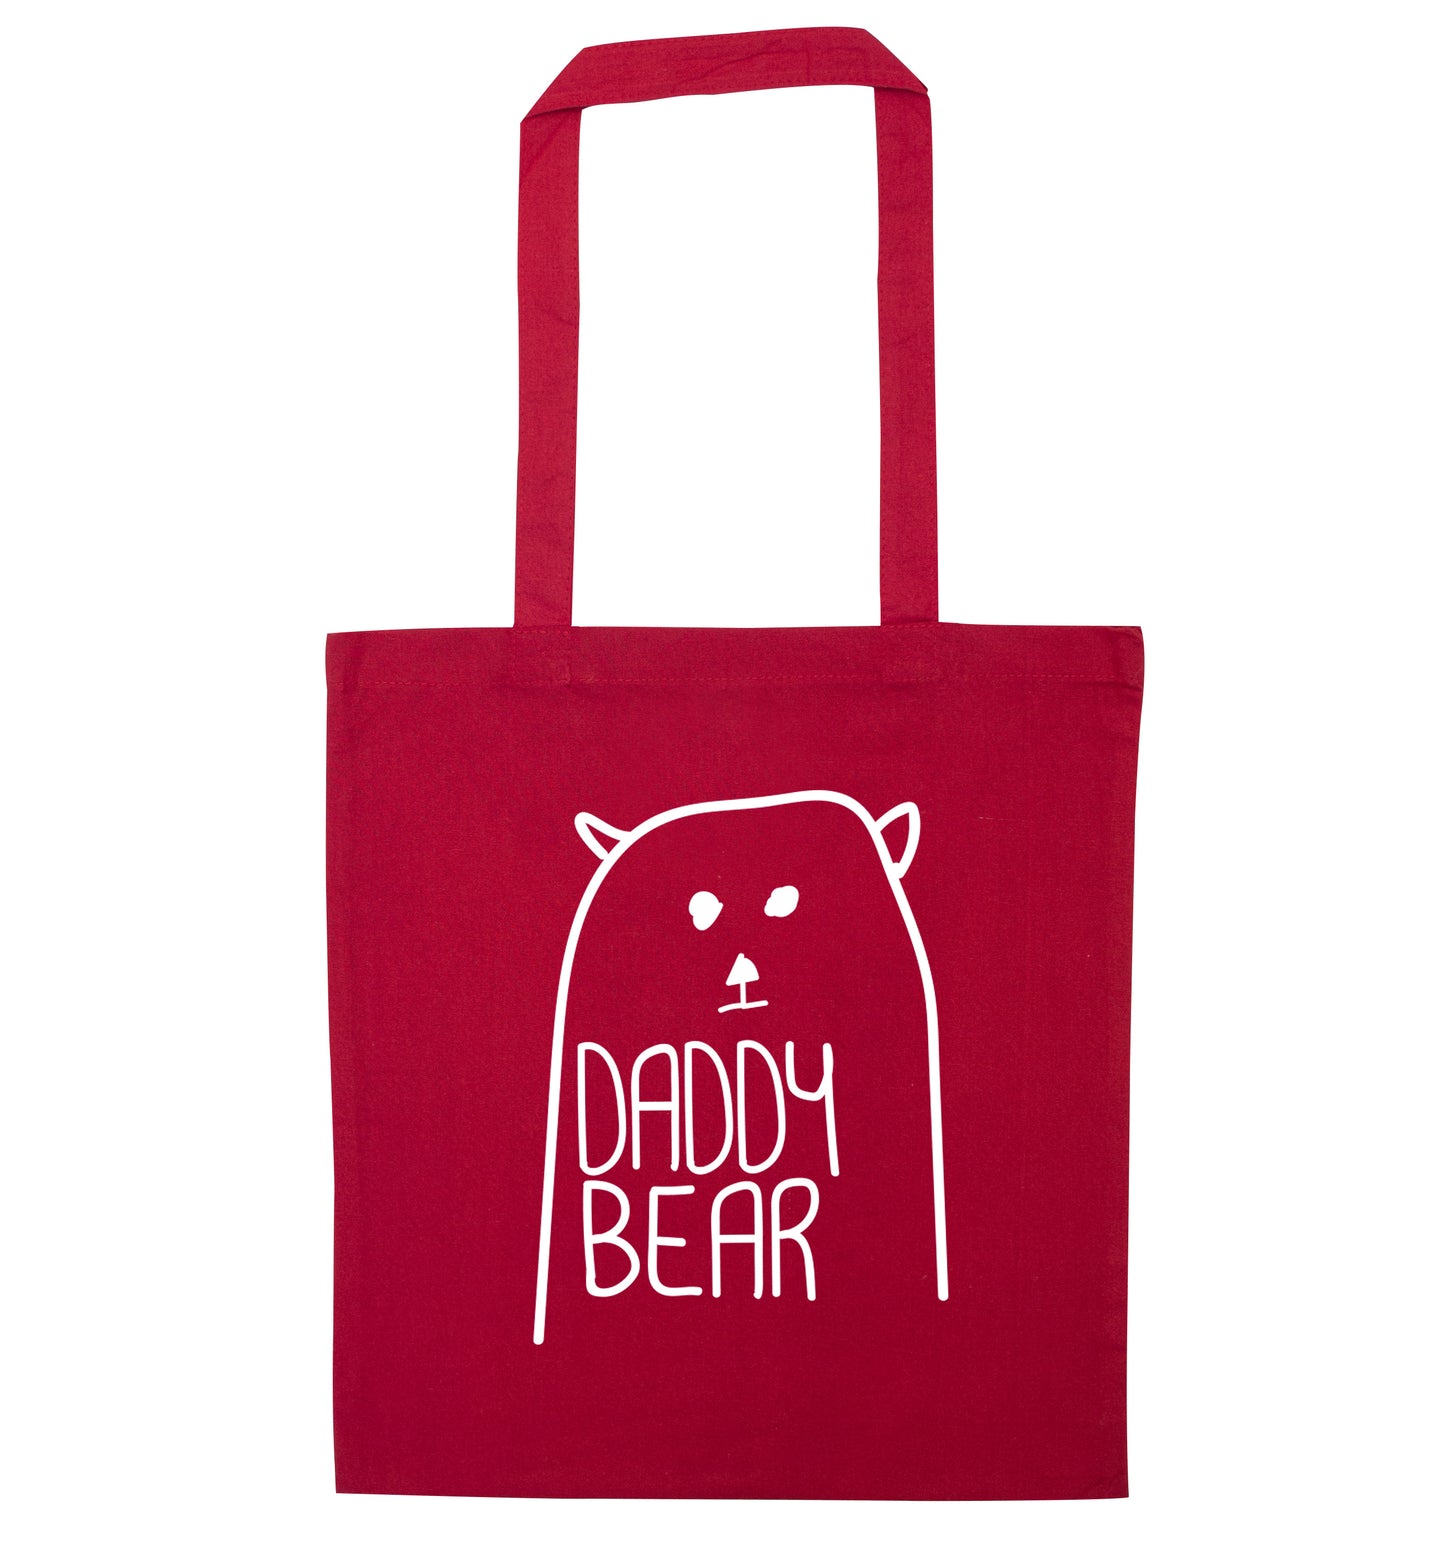 Daddy bear red tote bag